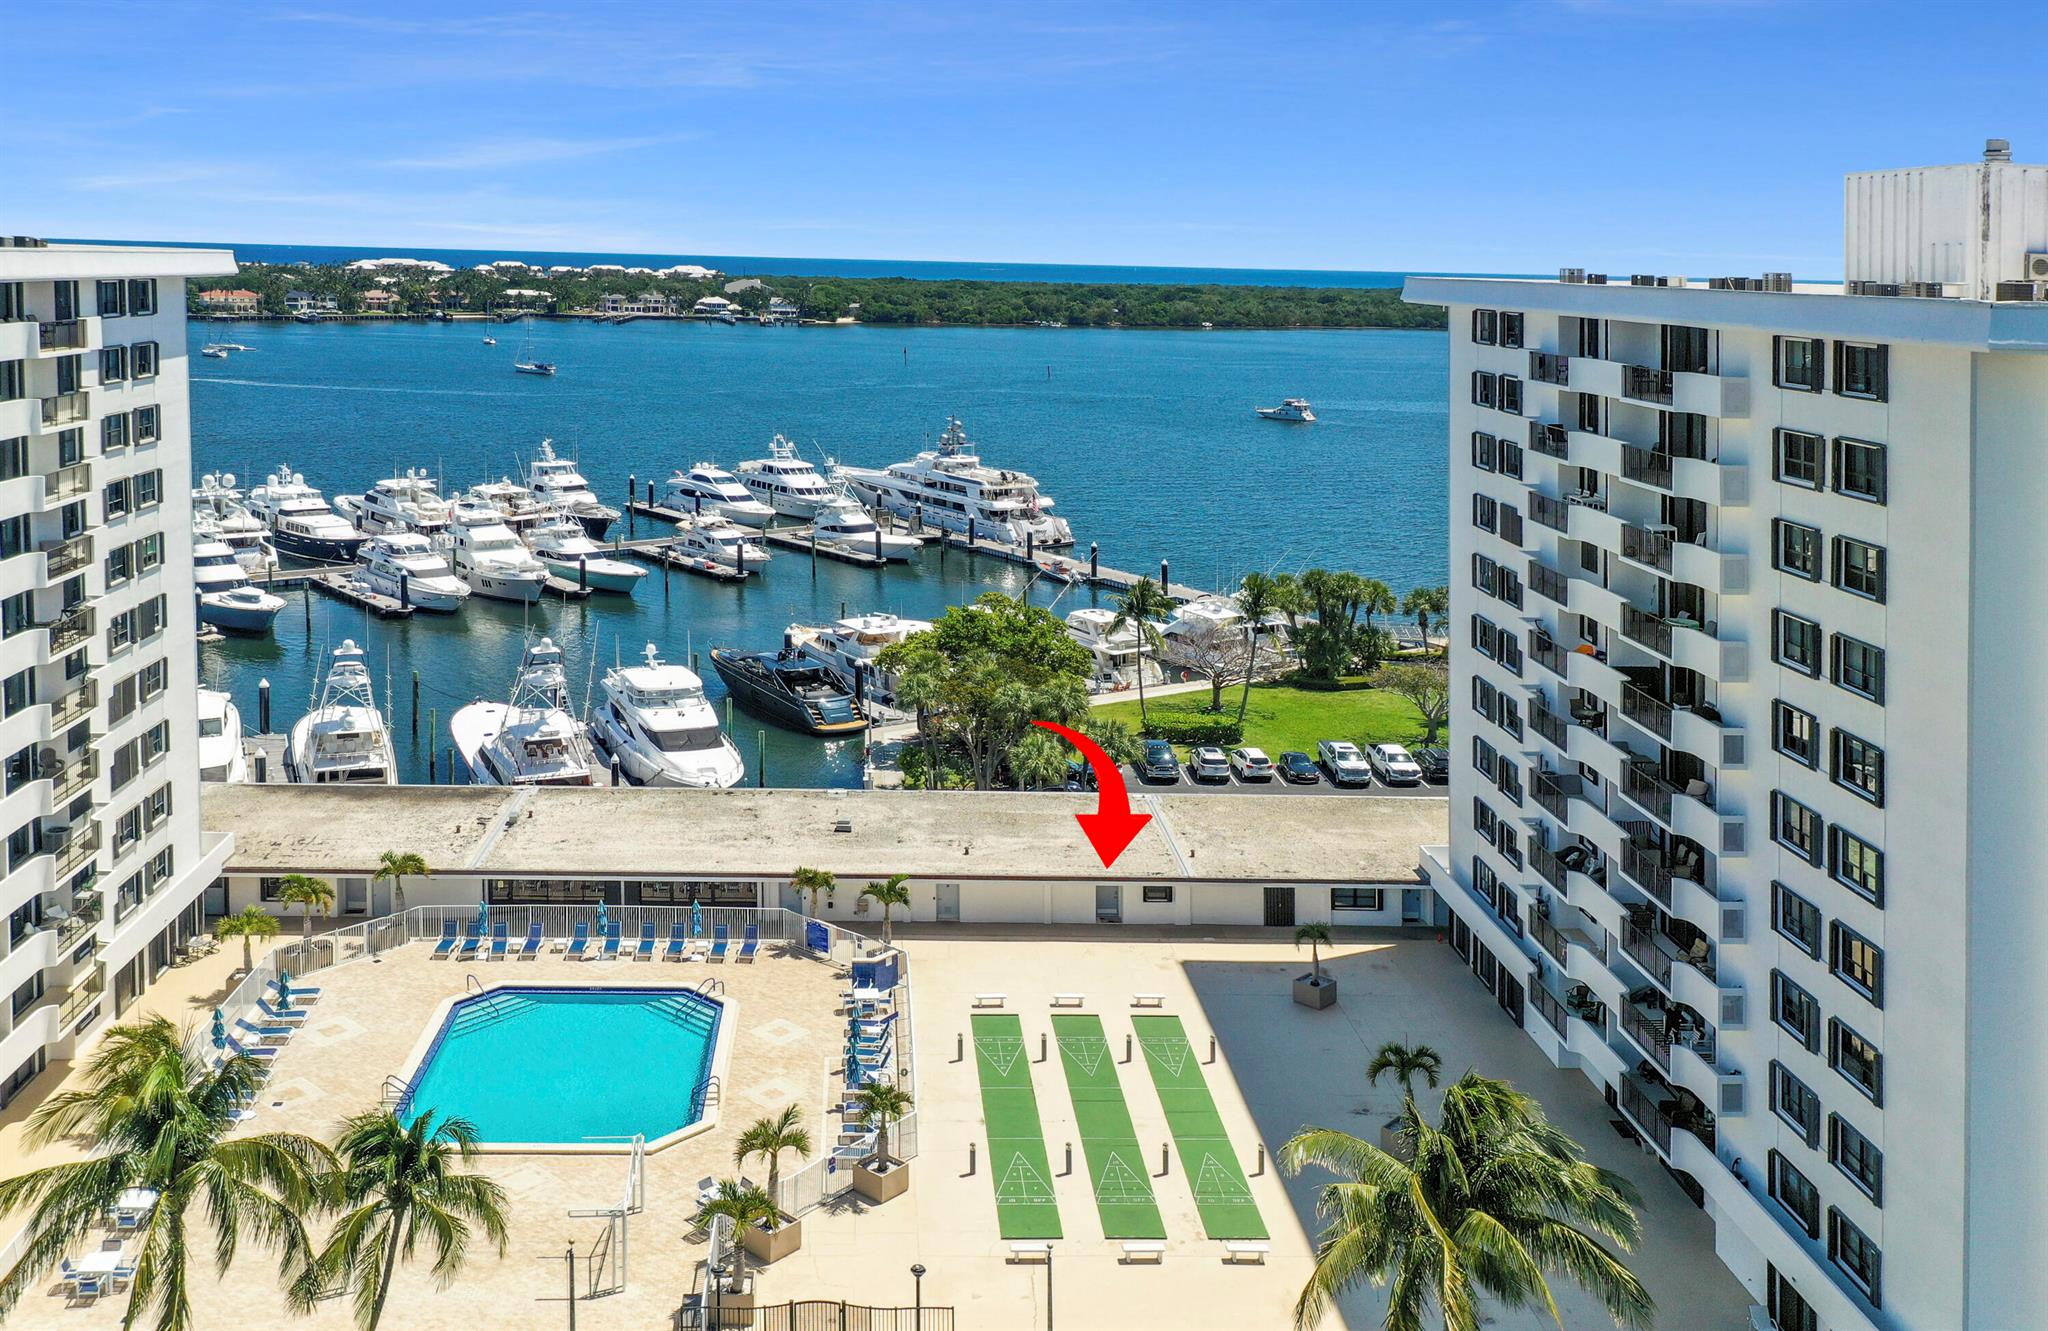 Priced For Quick Sale! It's all about the view & this marina view Garden Unit is marvelous!  This 1/1 in prestigious Old Port Cove is the pool deck floor & has no one above or below making this unit unique in condo living. It is the closest to the heated pool, sauna & club room.  Unit features an oversized 240 Sq ft balcony with marina and intracoastal views, stainless steel appliances, granite counter tops, lots of storage including a walk in closet,  accordian hurricane shutters & new paint. Community also includes 24 hour manned gate, reading/game room, 2 mile walking path, tennis and community laundry.   Washer/dryer is allowed to be installed in unit.  Fees include cable, internet, water, trash, sewer, manned gate.  Nearby pristine beaches, shopping, entertainment and 20 min to PB